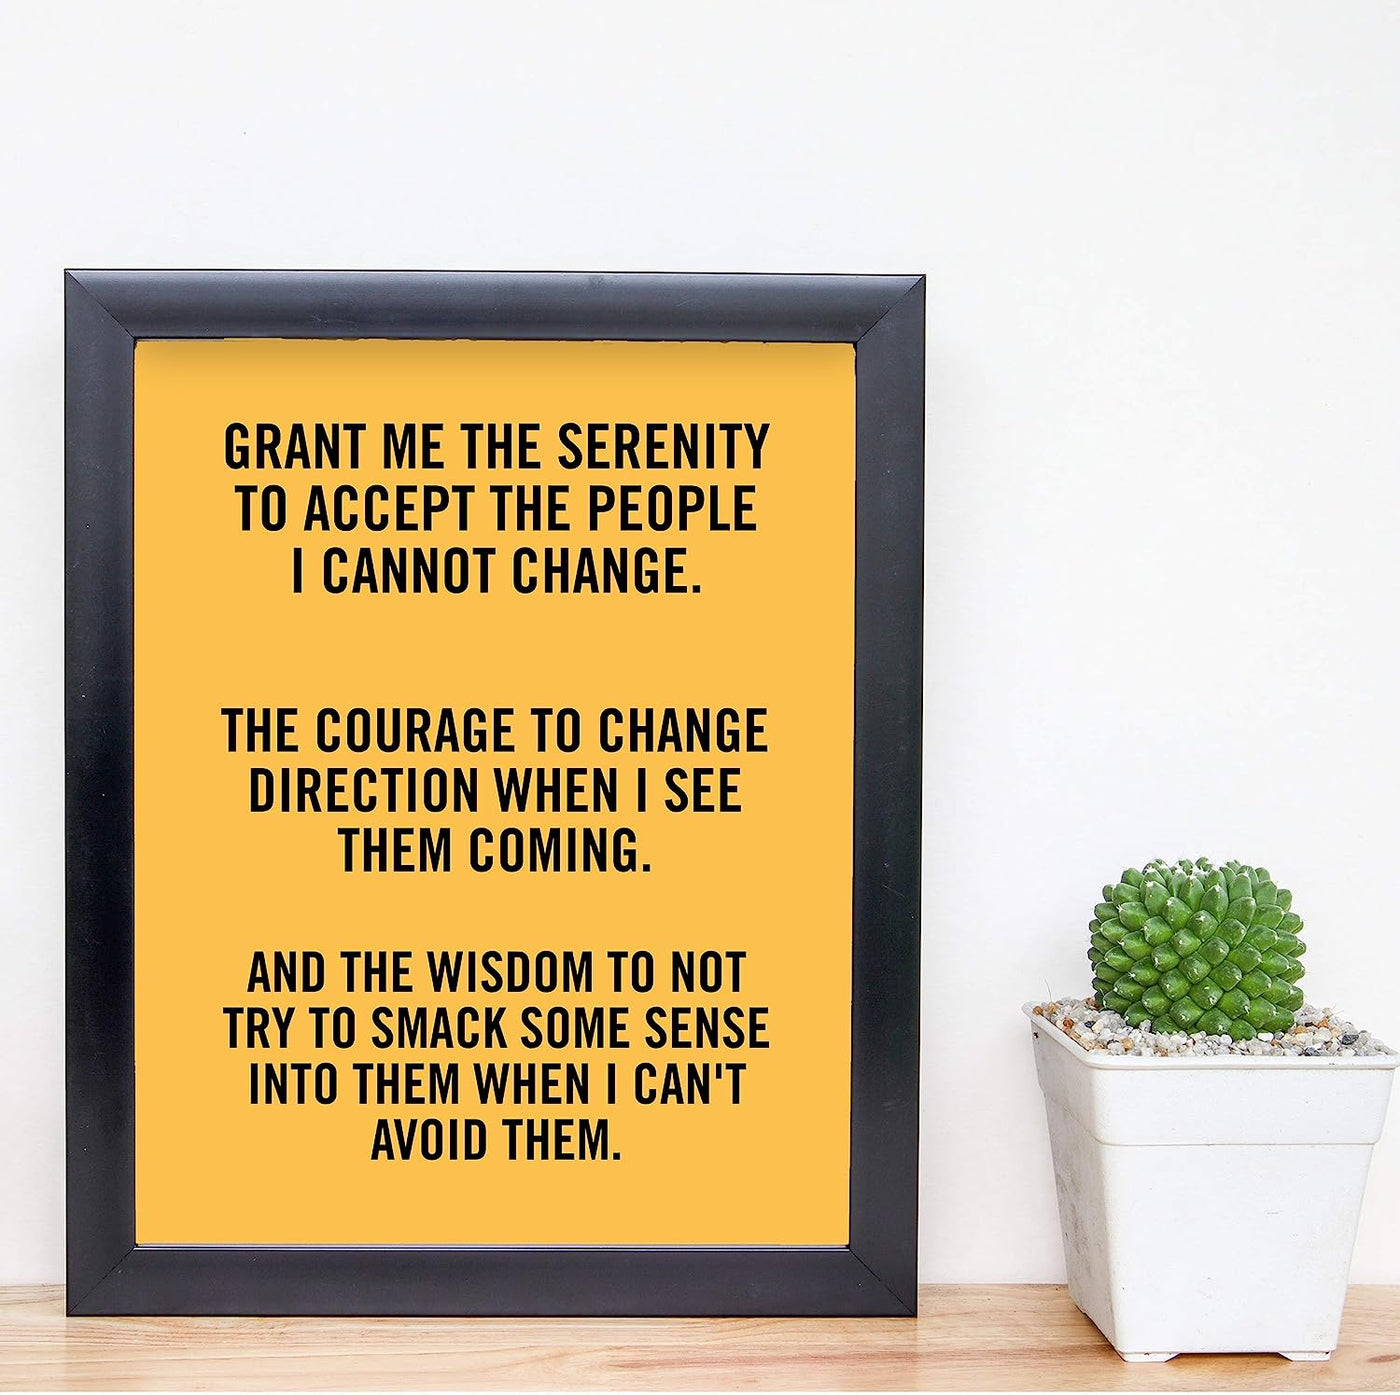 Grant Me the Wisdom to Not Smack Them Funny Wall Art -8 x 10" Sarcastic Print-Ready to Frame. Modern Typographic Design. Humorous Home-Office-Bar-Shop-Cave Decor. Great Novelty Sign-Fun Gift!